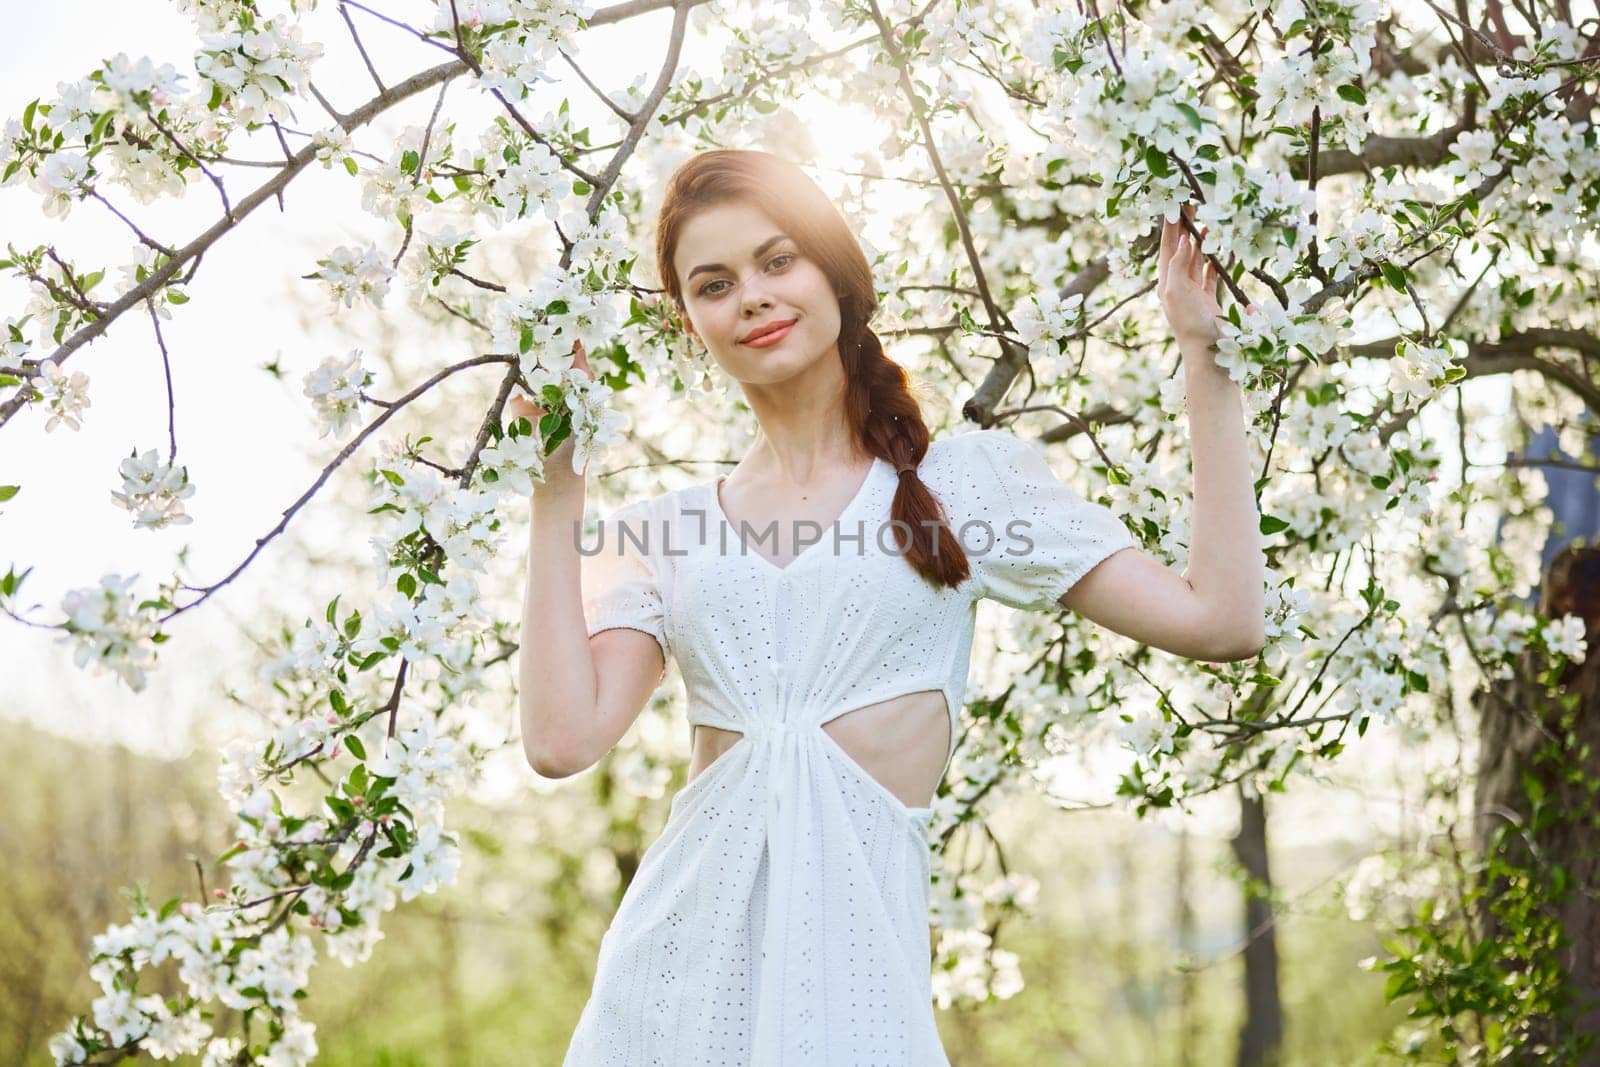 portrait of a happy, laughing red-haired woman next to a flowering tree in the garden by Vichizh